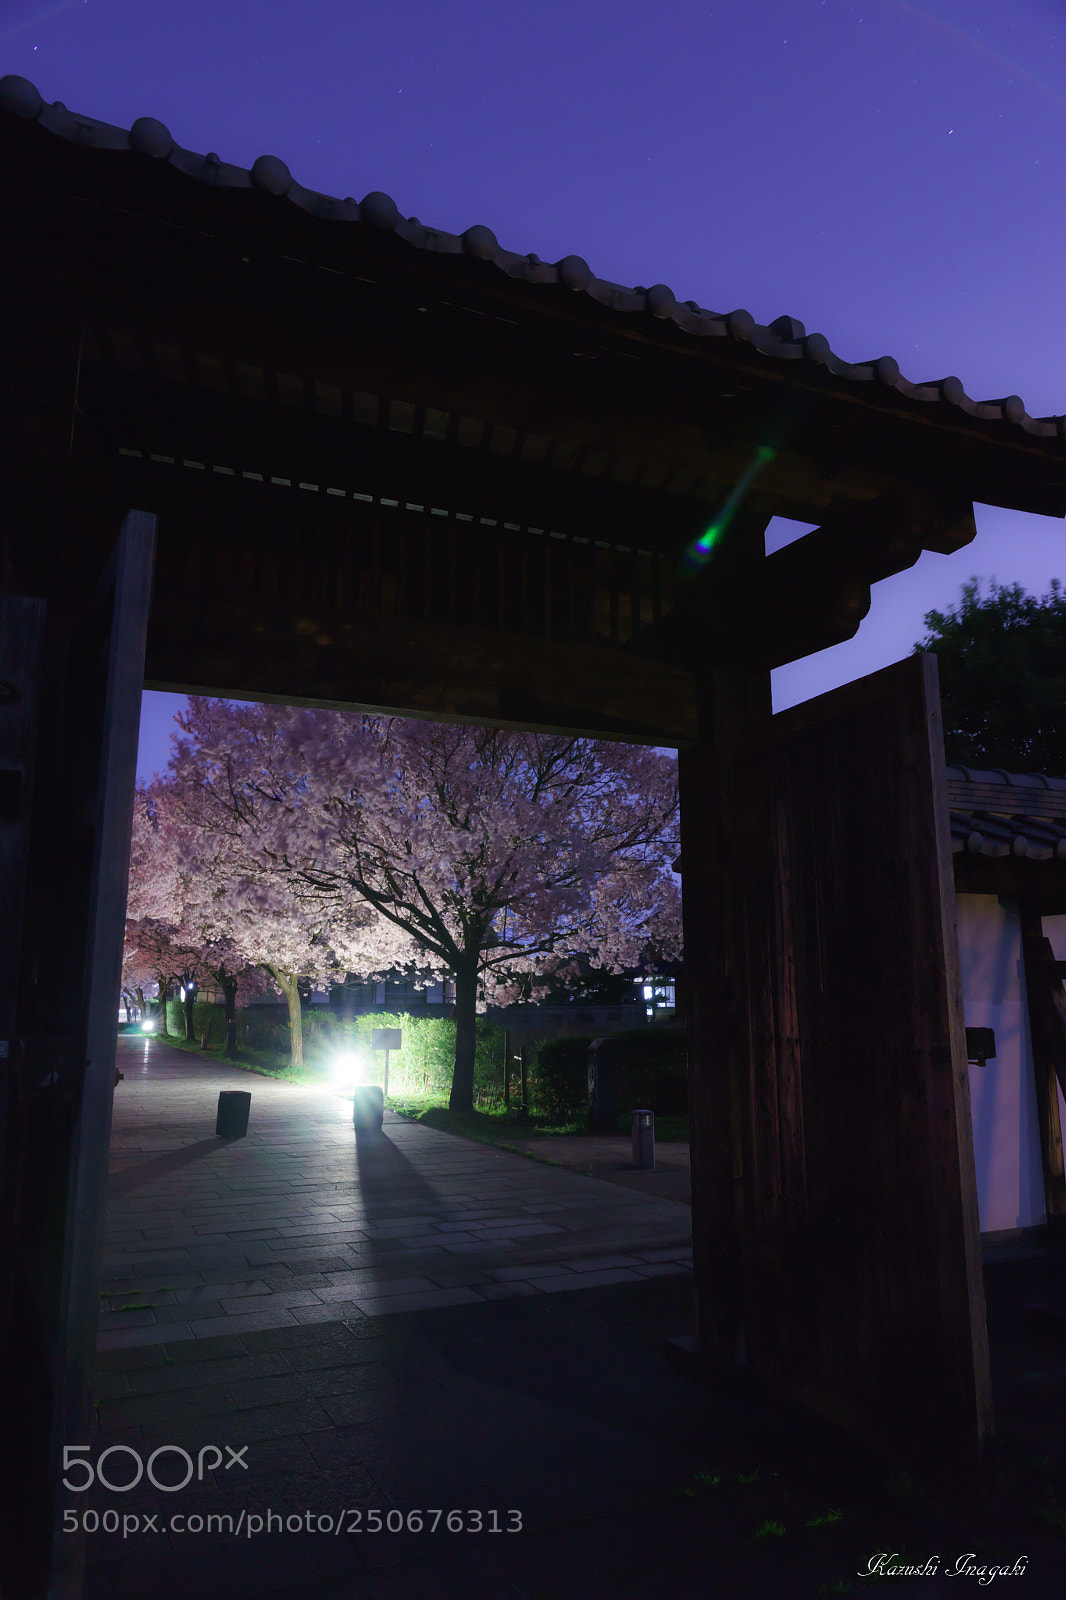 Sony a99 II sample photo. Cherry blossom with pretentious photography